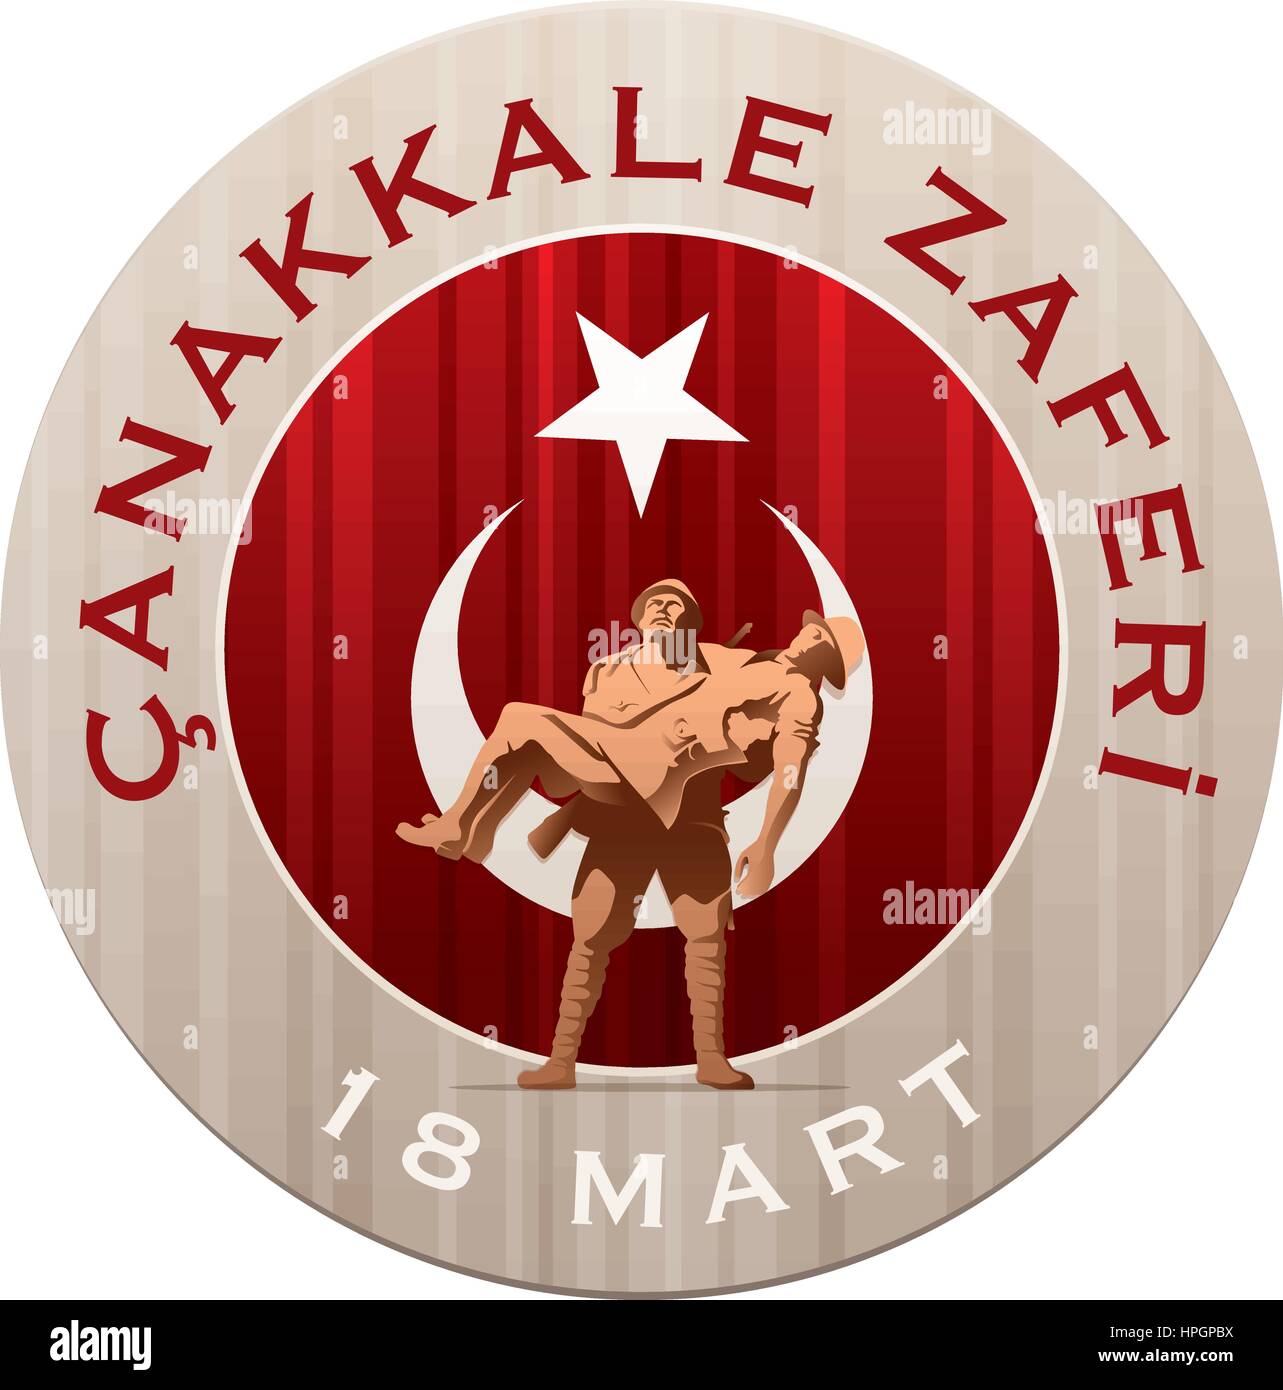 Republic of Turkey National Celebration Card Design. 18th March Martyrs Remembrance Day, Canakkale. Anniversary of Canakkale Victory. Stock Vector